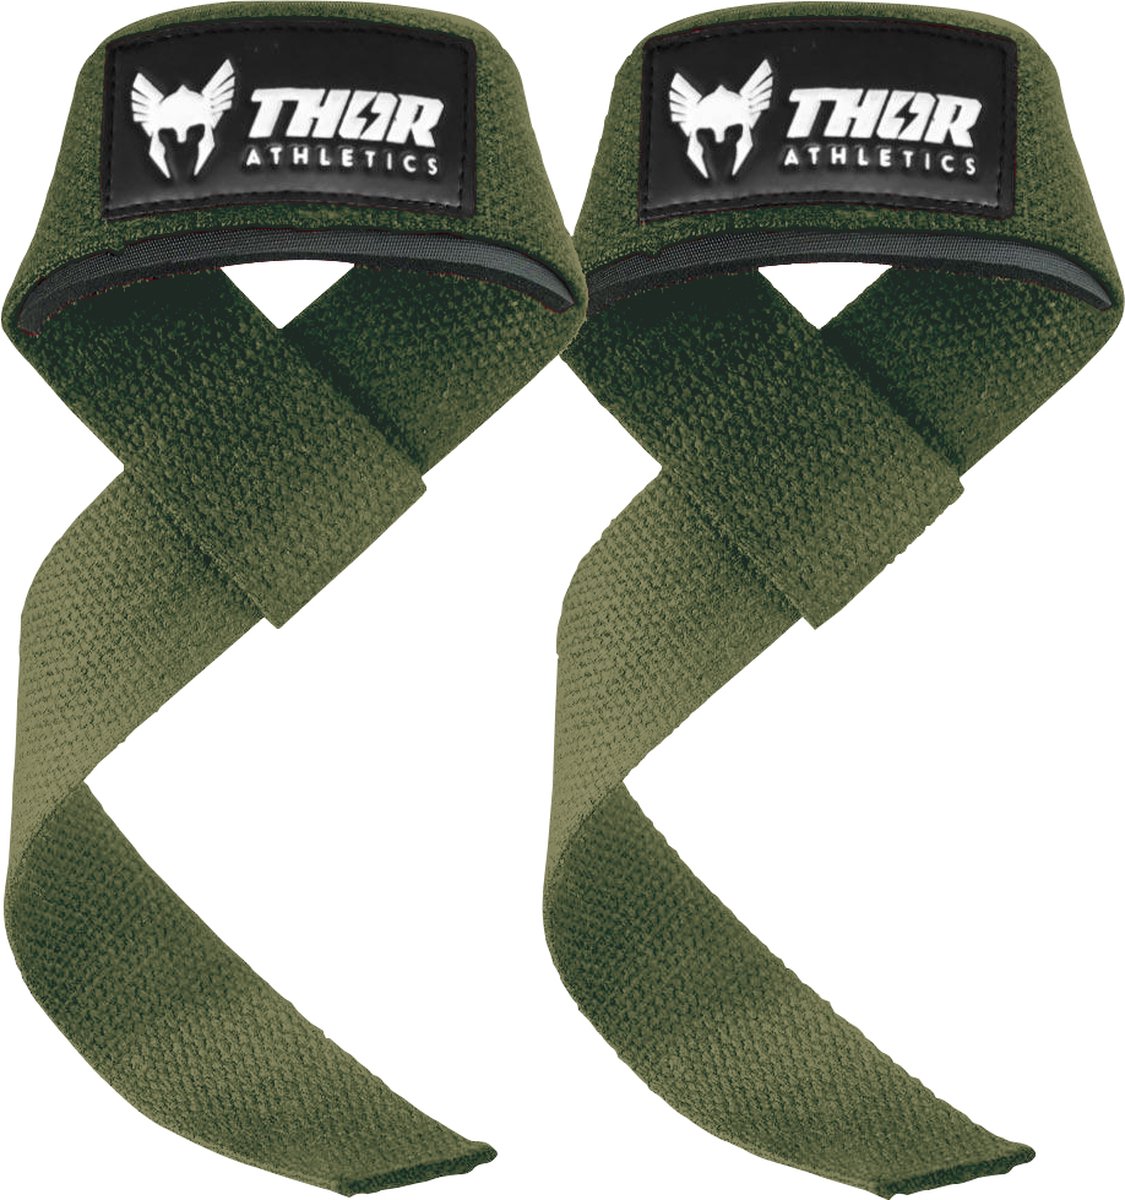 Thor Athletics Lifting Straps - Krachttraining Accessoires - Powerlifting Straps - Deadlift Straps - Army Green - Thor Athletics